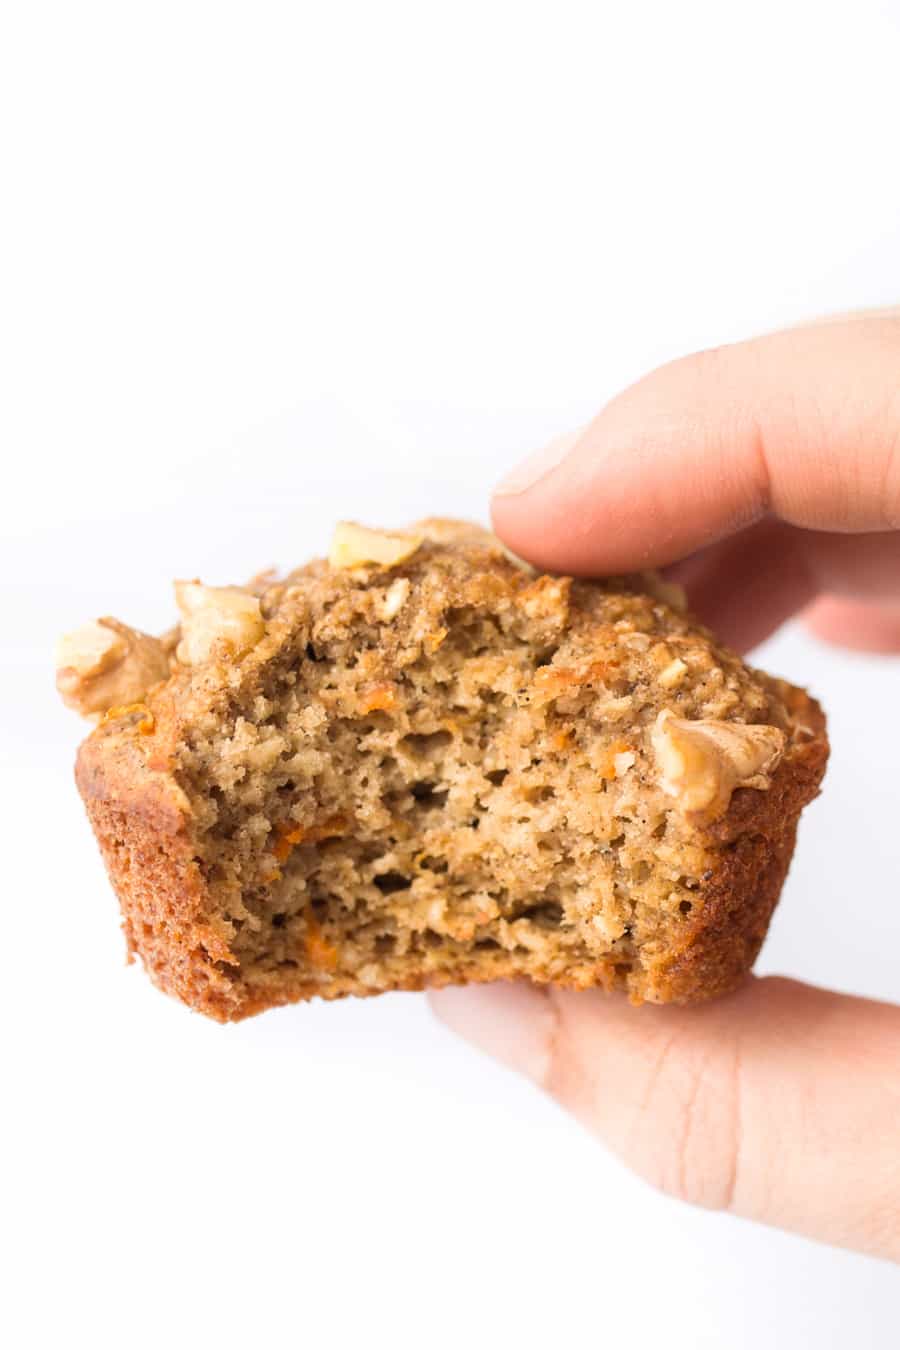 These HEALTHY Carrot Cake Blender Muffins are a great way to sneak in some extra fruit to your breakfast! [naturally GF too]